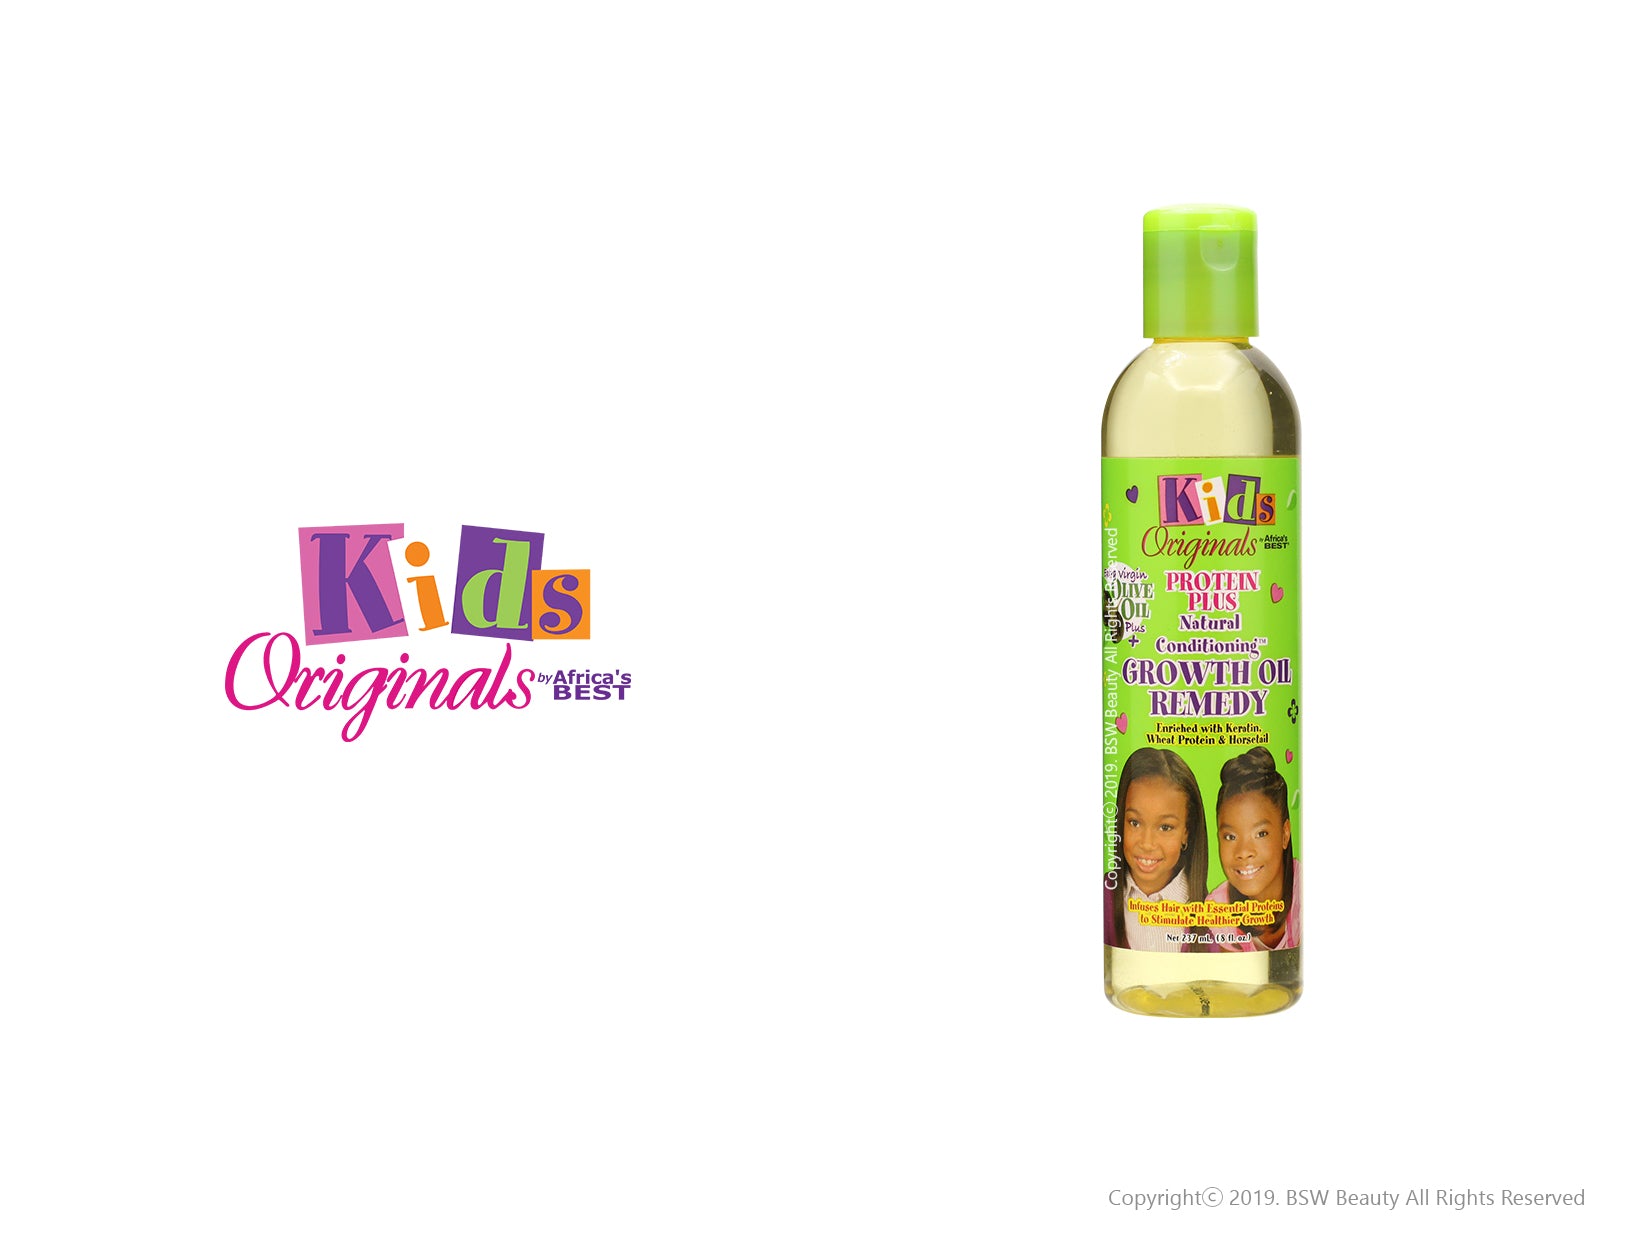 AFRICA'S BEST KIDS ORIGINALS PROTEIN PLUS NATURAL CONDITIONING GROWTH OIL REMEDY 8oz